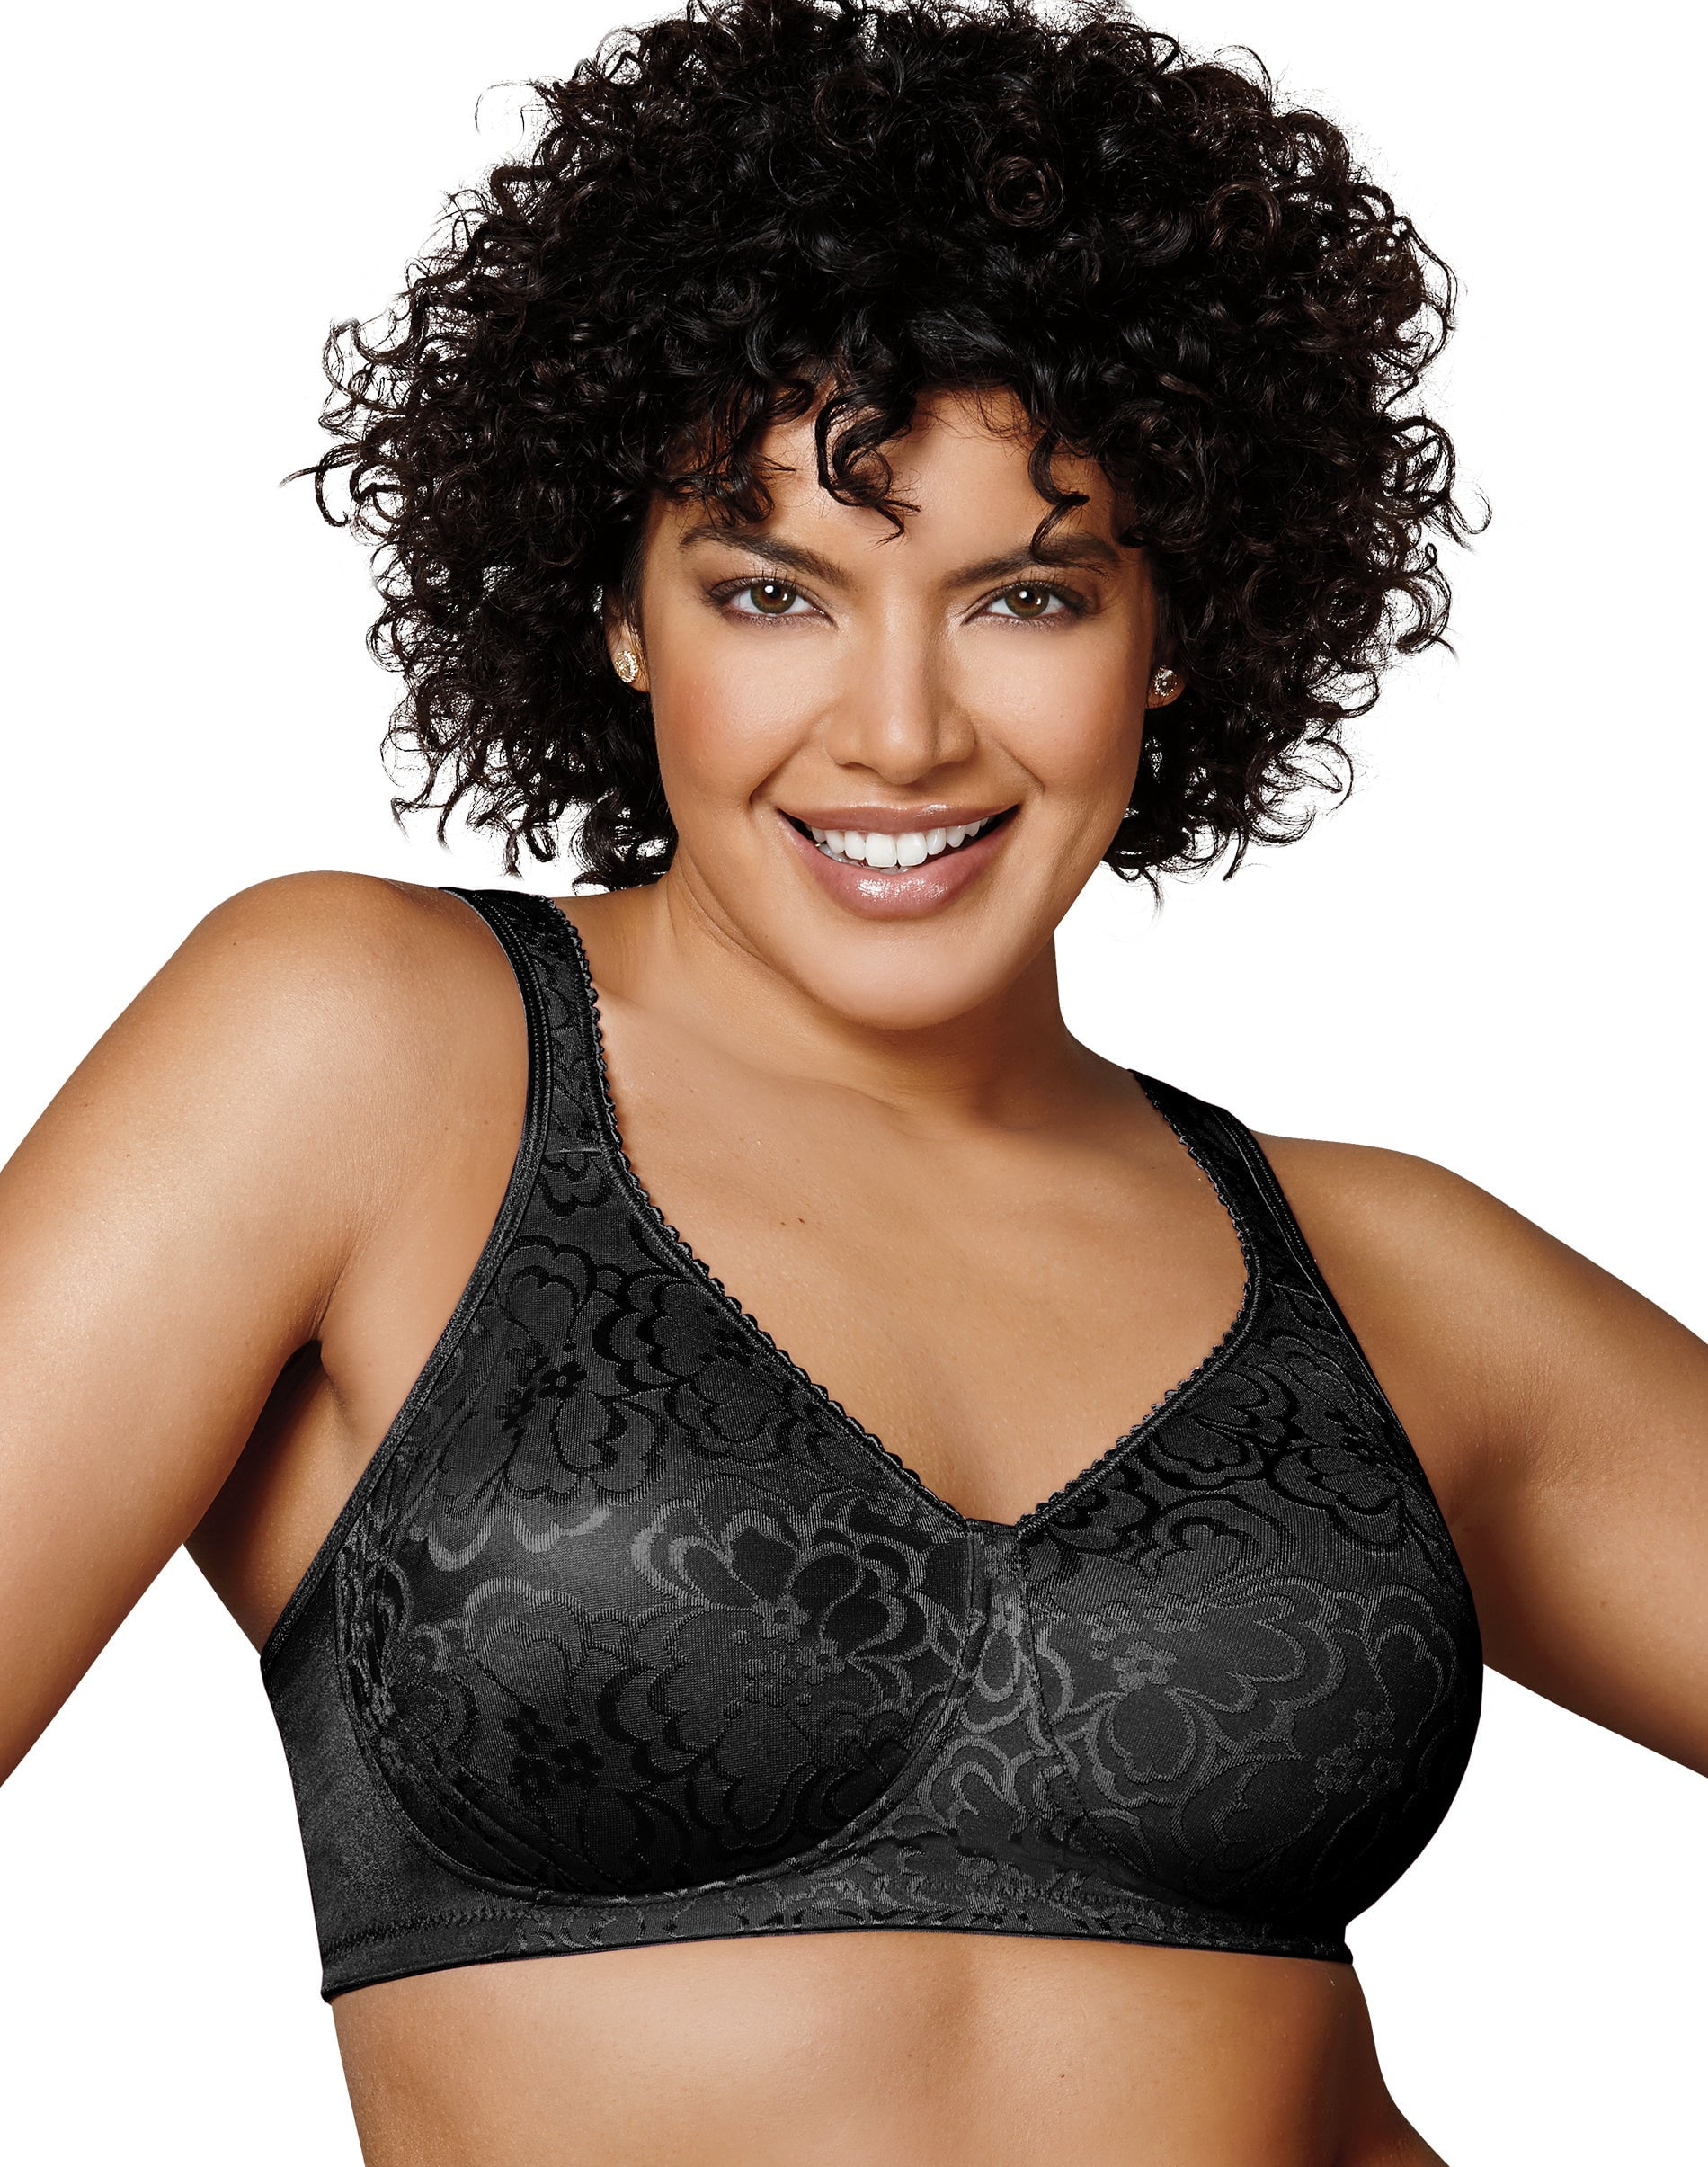 18 Hour Ultimate Lift and Support Bra Black 44B by Playtex